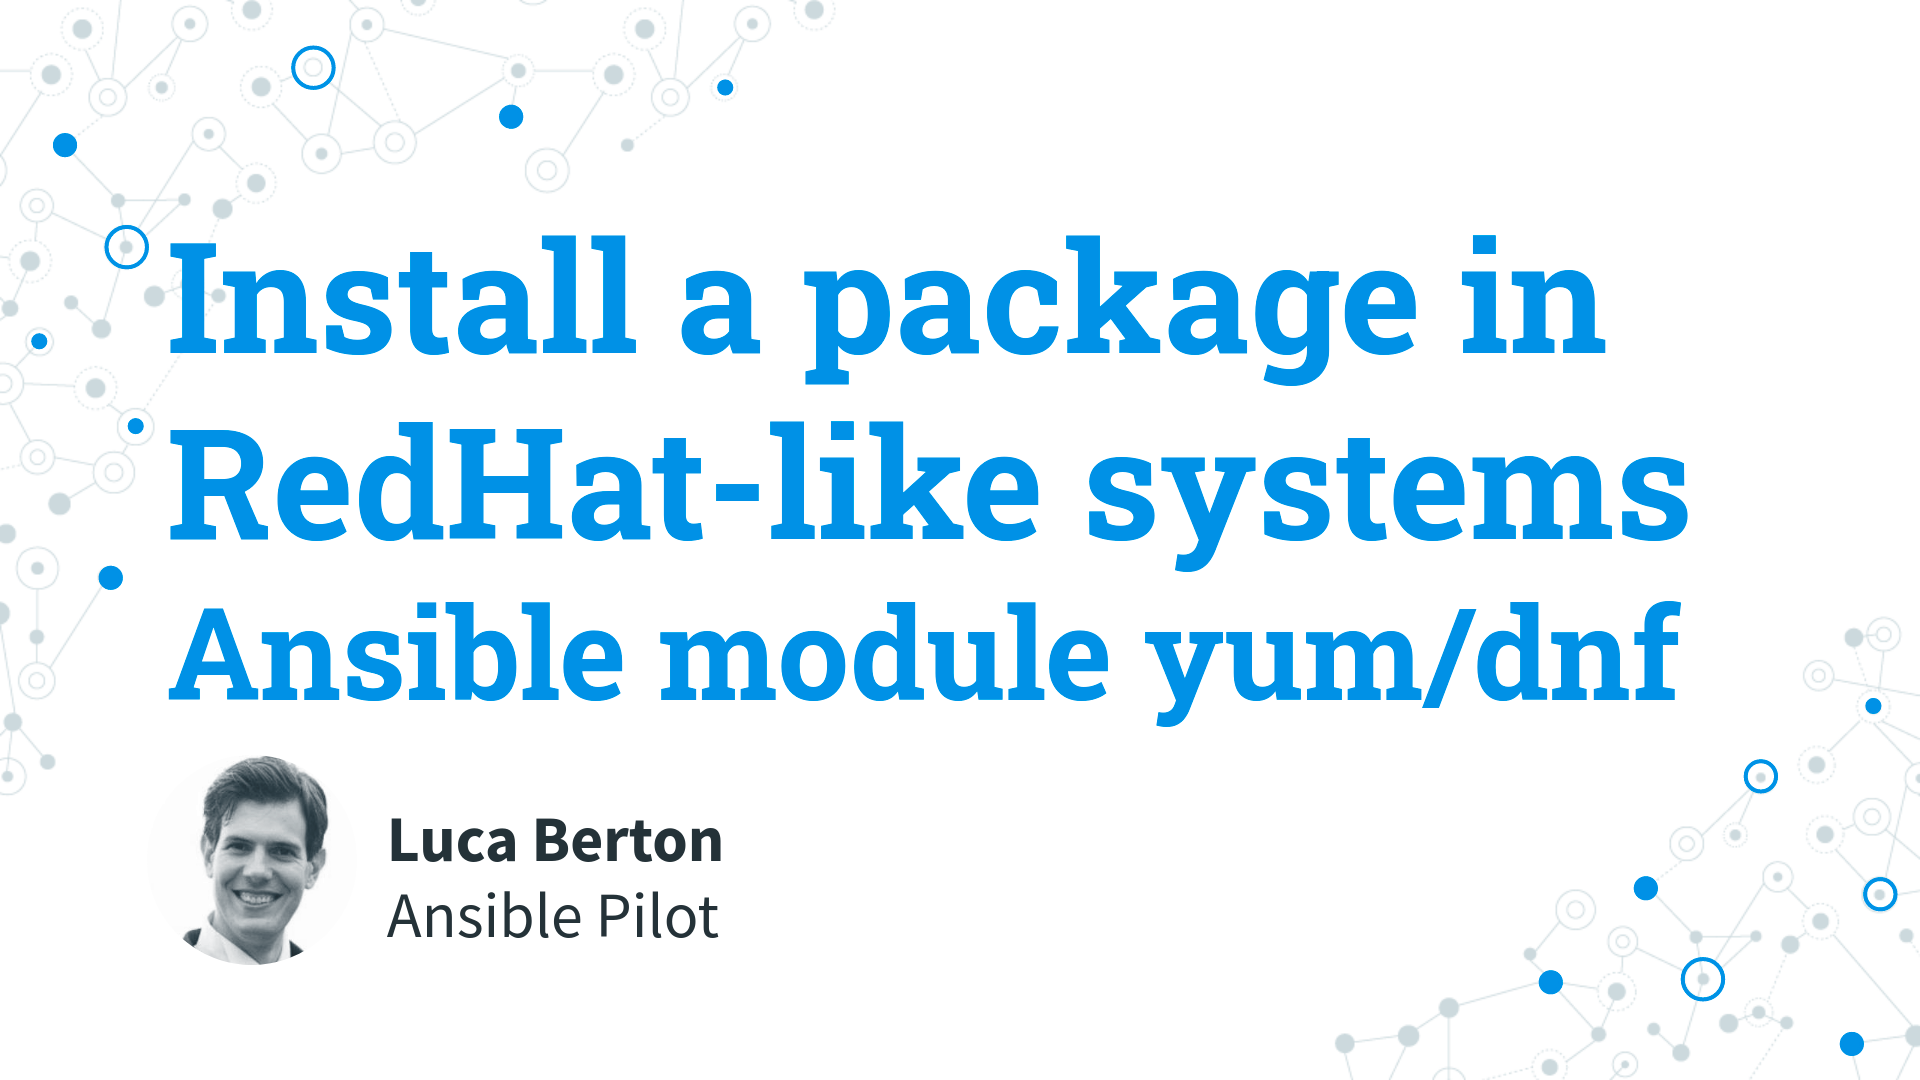 Install a package in RedHat-like systems - Ansible module yum